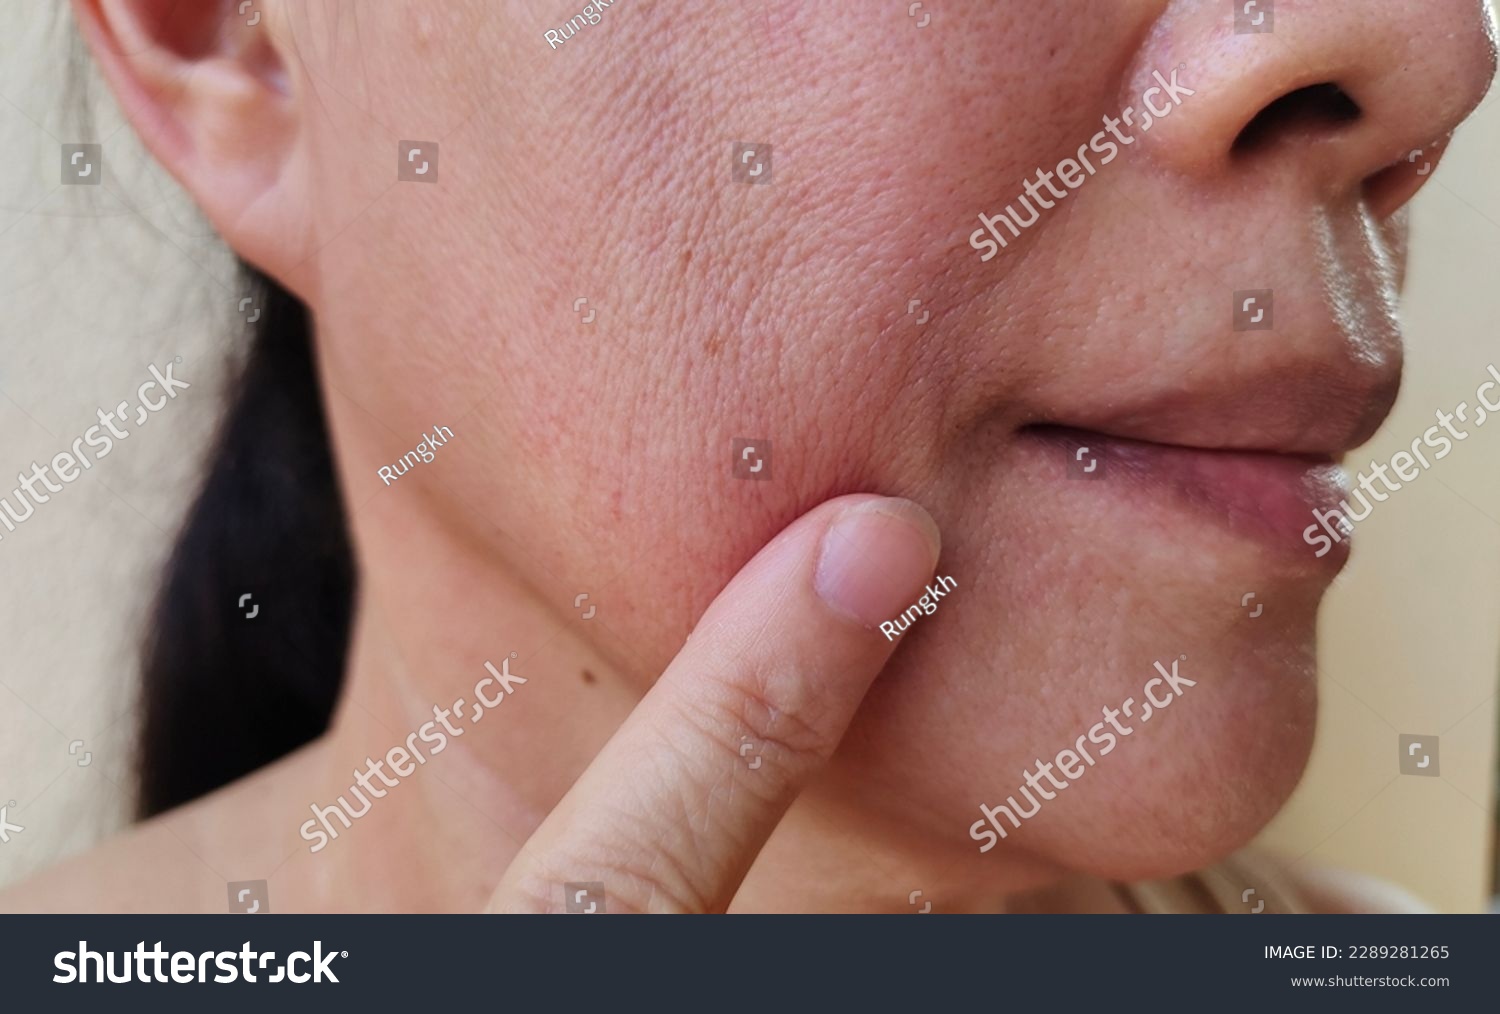 portrait the flabbiness and wrinkle  corner  of the mouth, smile lines and flabby skin beside the mouth , dark spots and dull skin, freckles and blemish on the face, health care and beauty concept. #2289281265